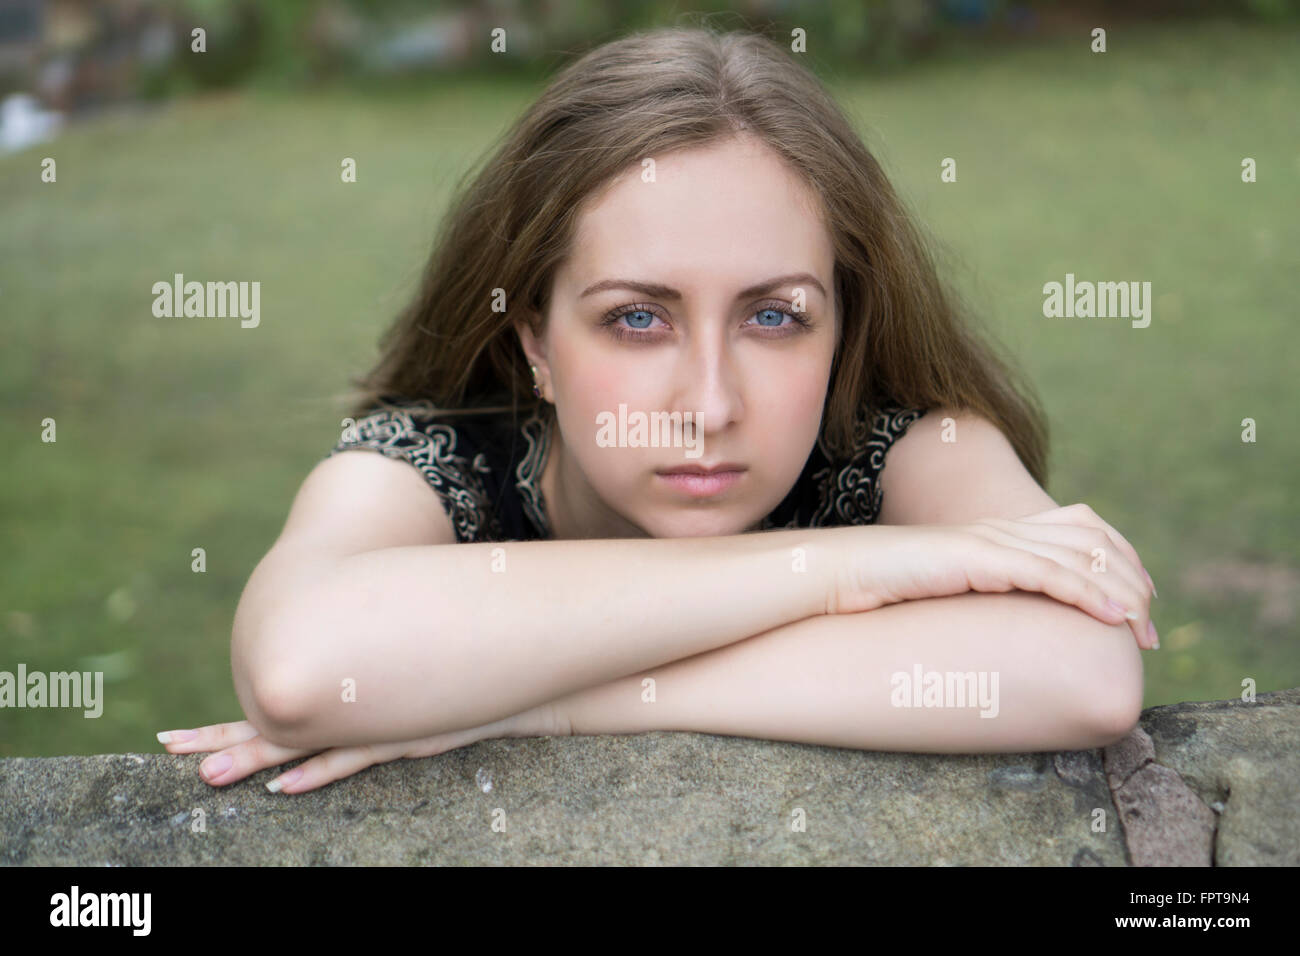 Serious young woman leaning on her arms outdoors Stock Photo